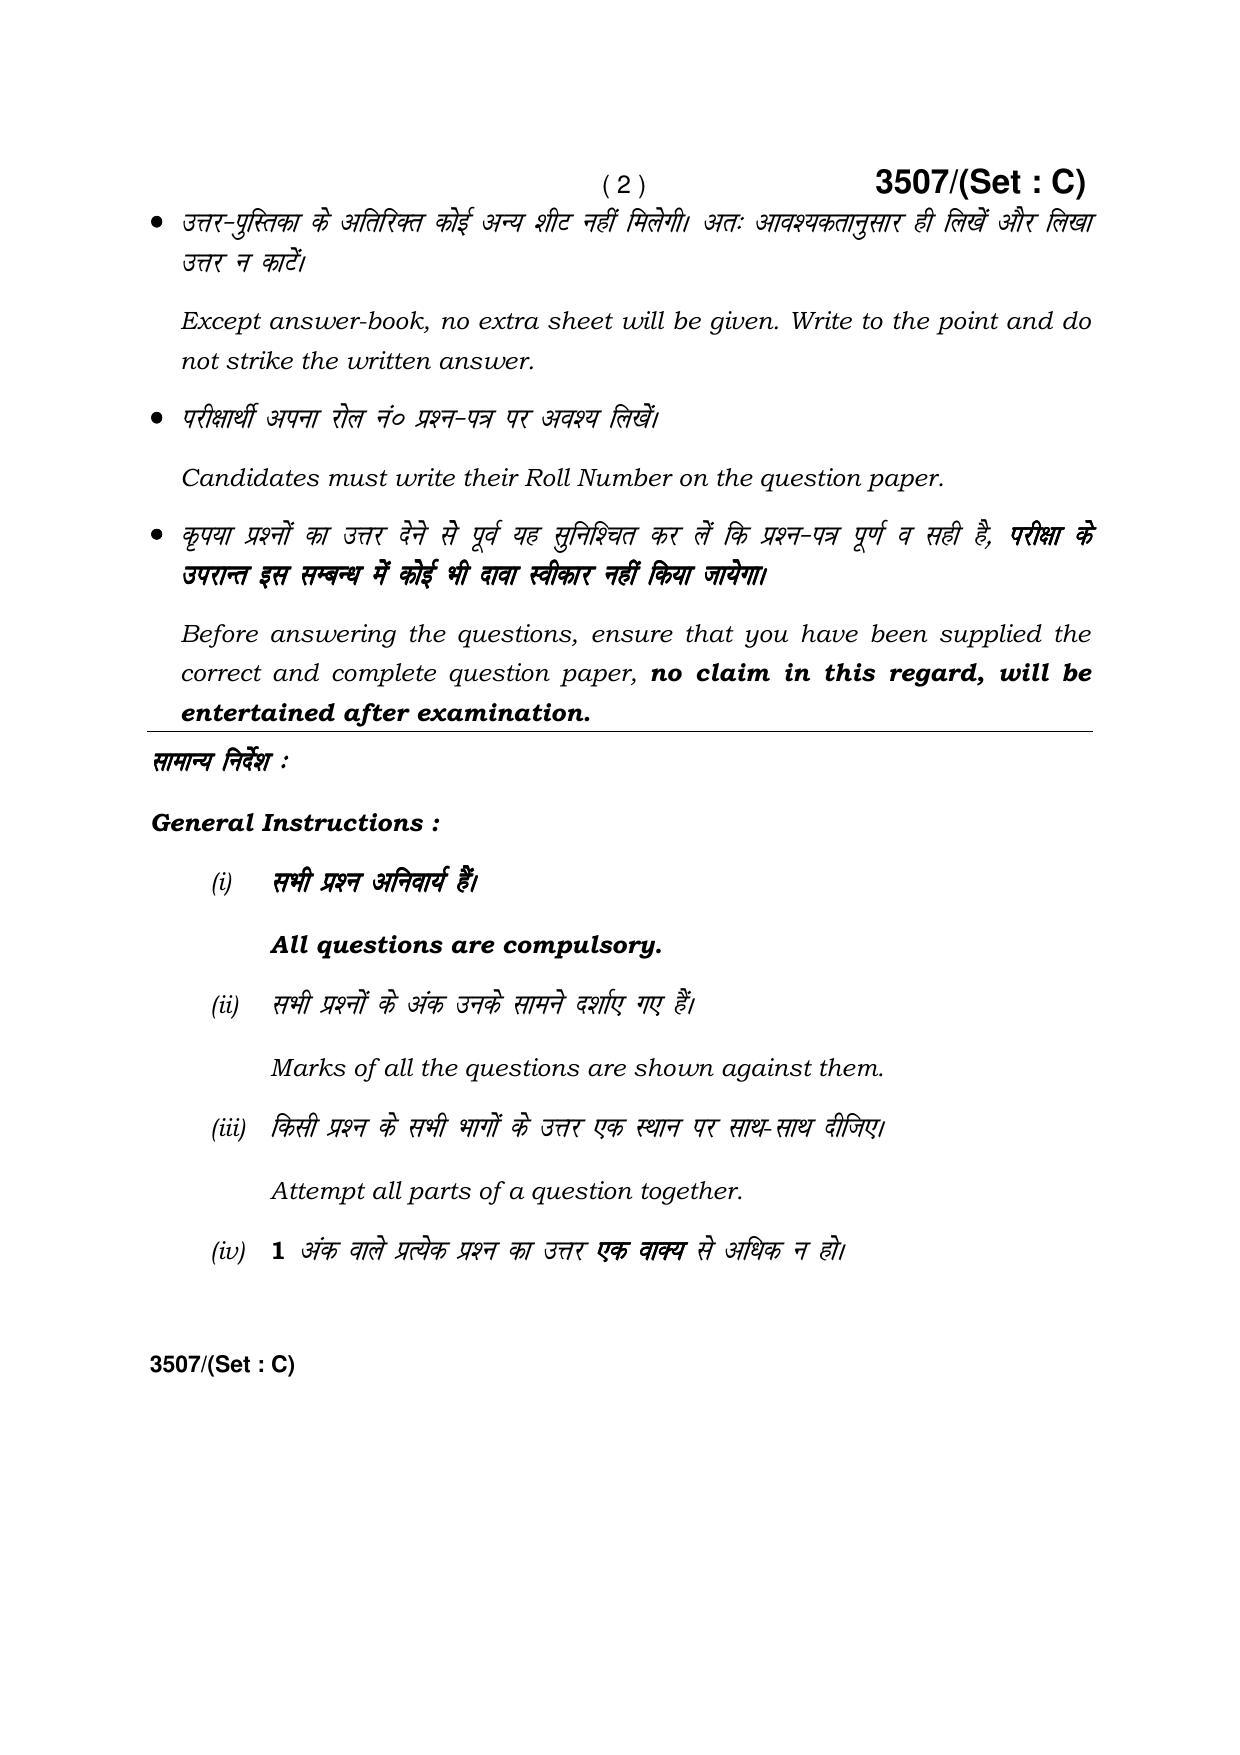  Haryana Board HBSE Class 10 Social Science -C 2018 Question Paper - Page 2